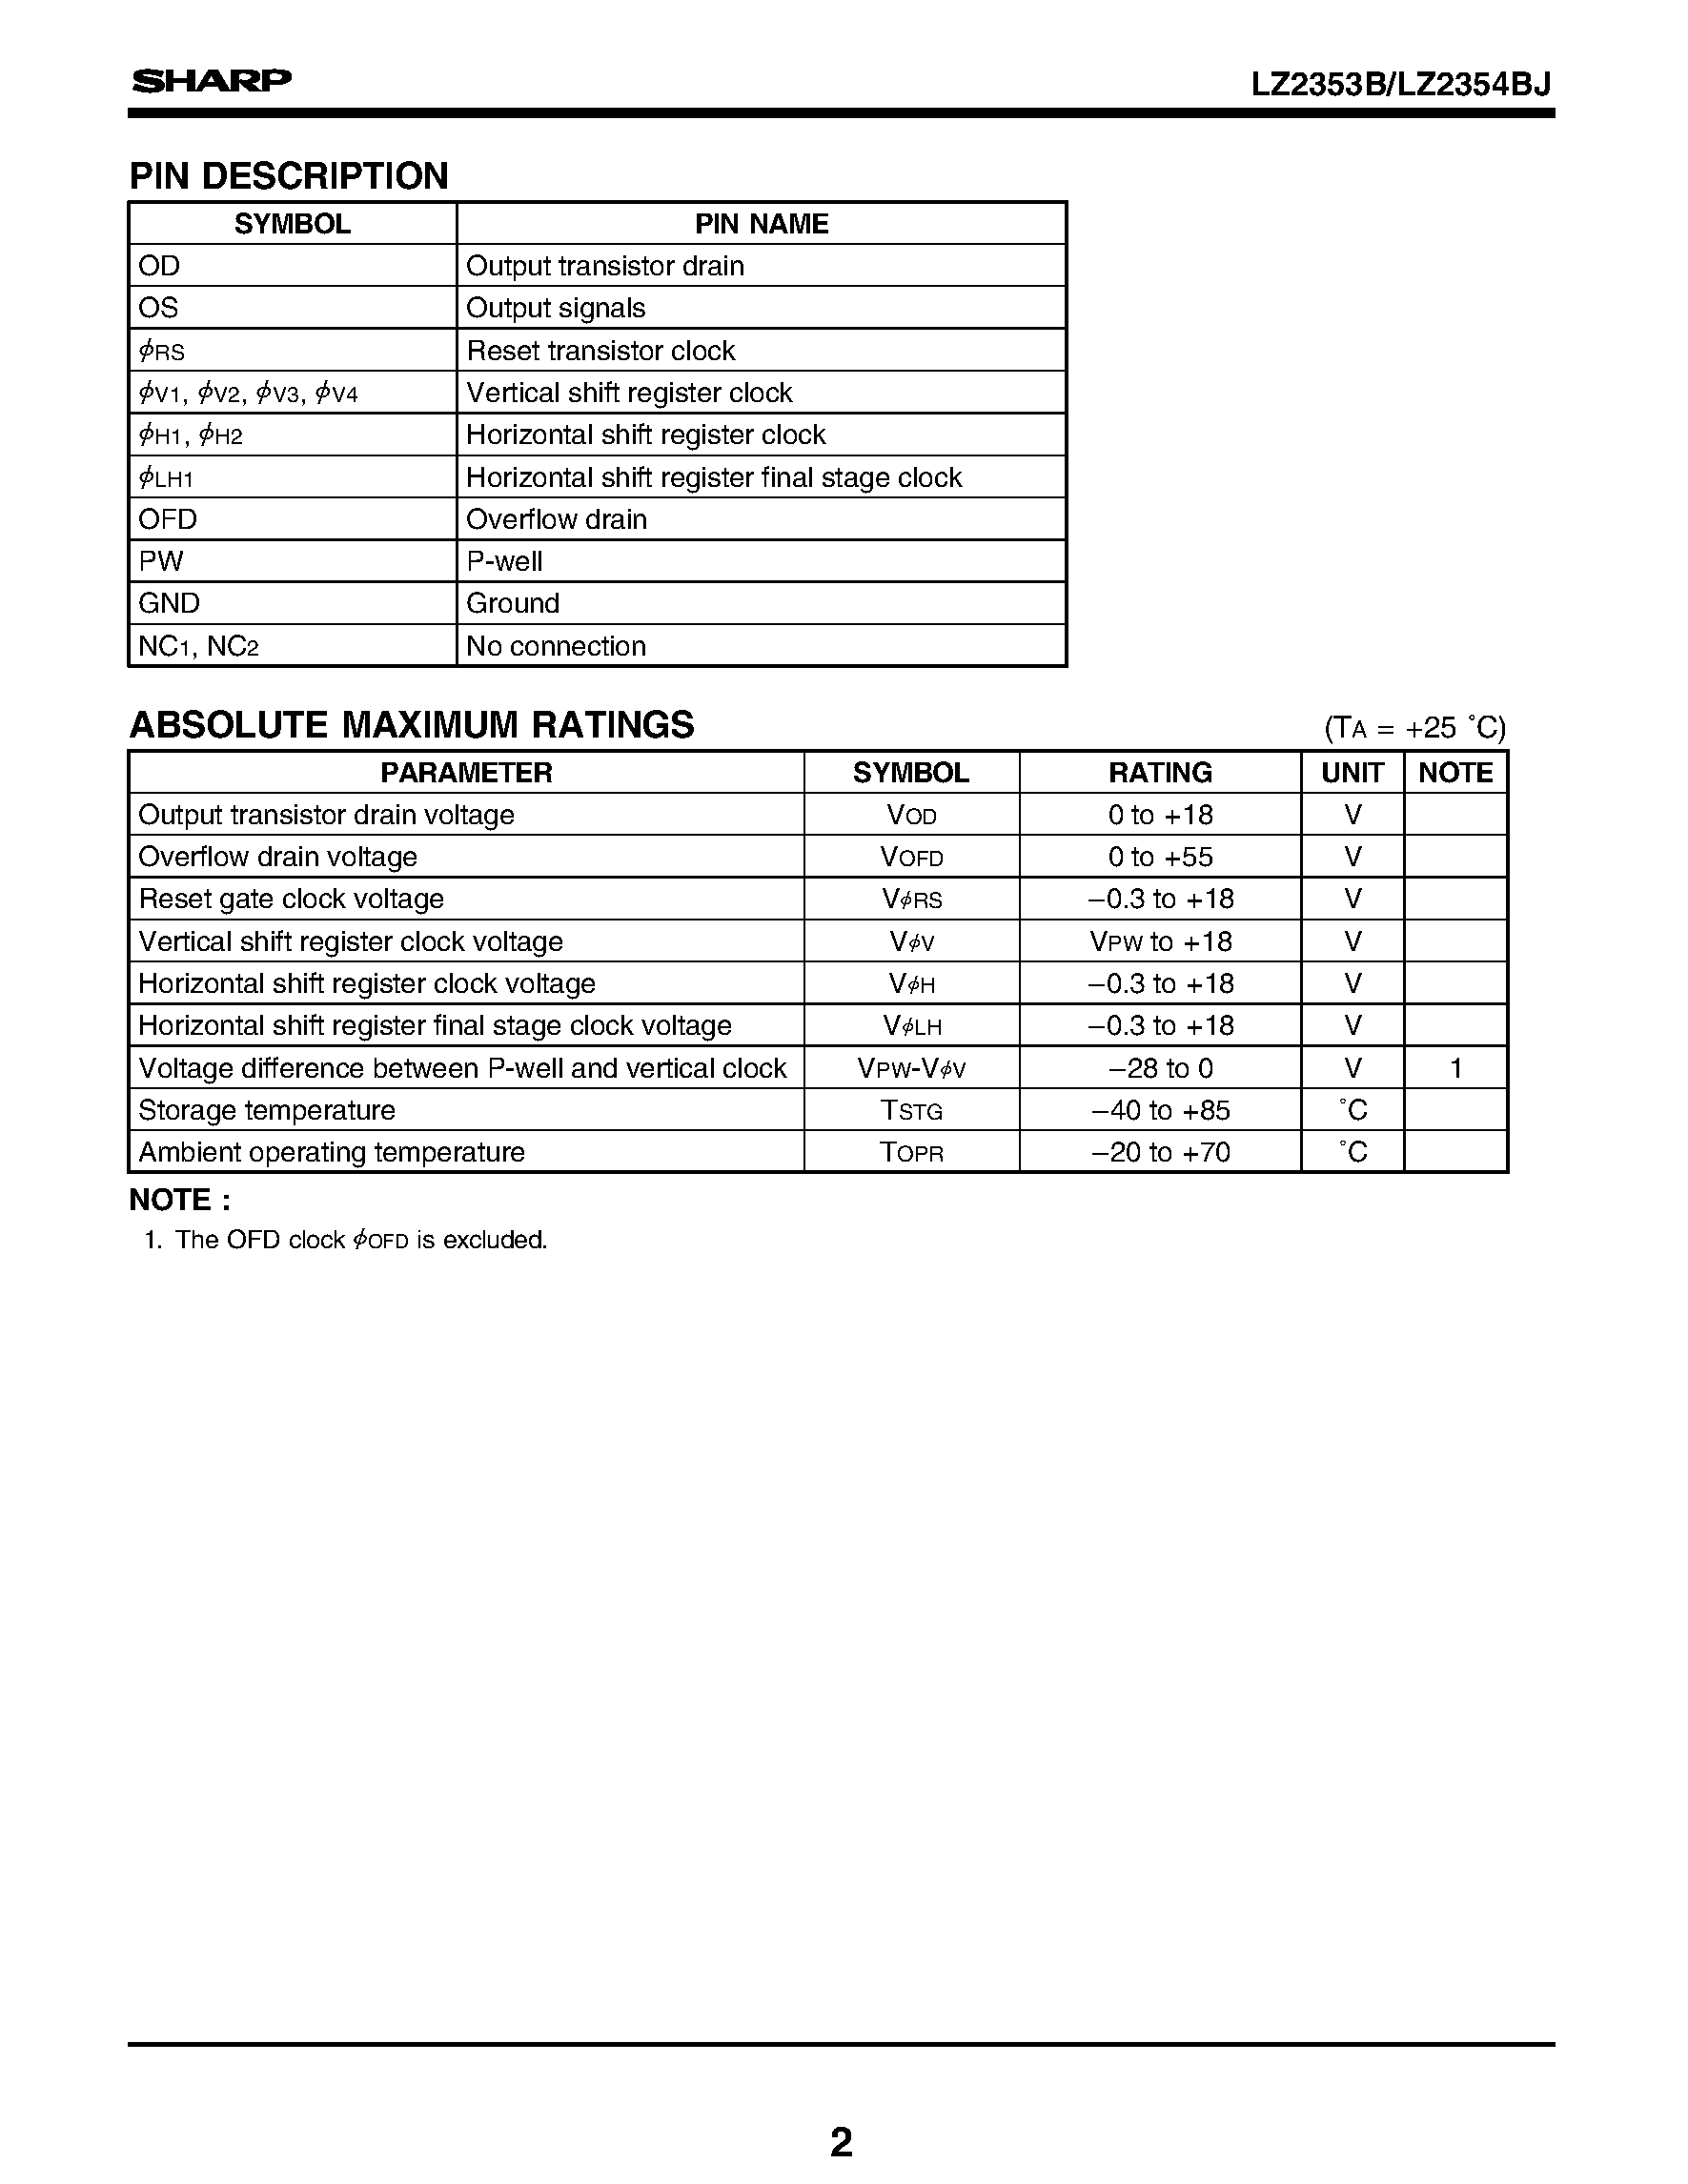 Datasheet LZ2353 - 1/3-type CCD Area Sensors with 410 k Pixels page 2